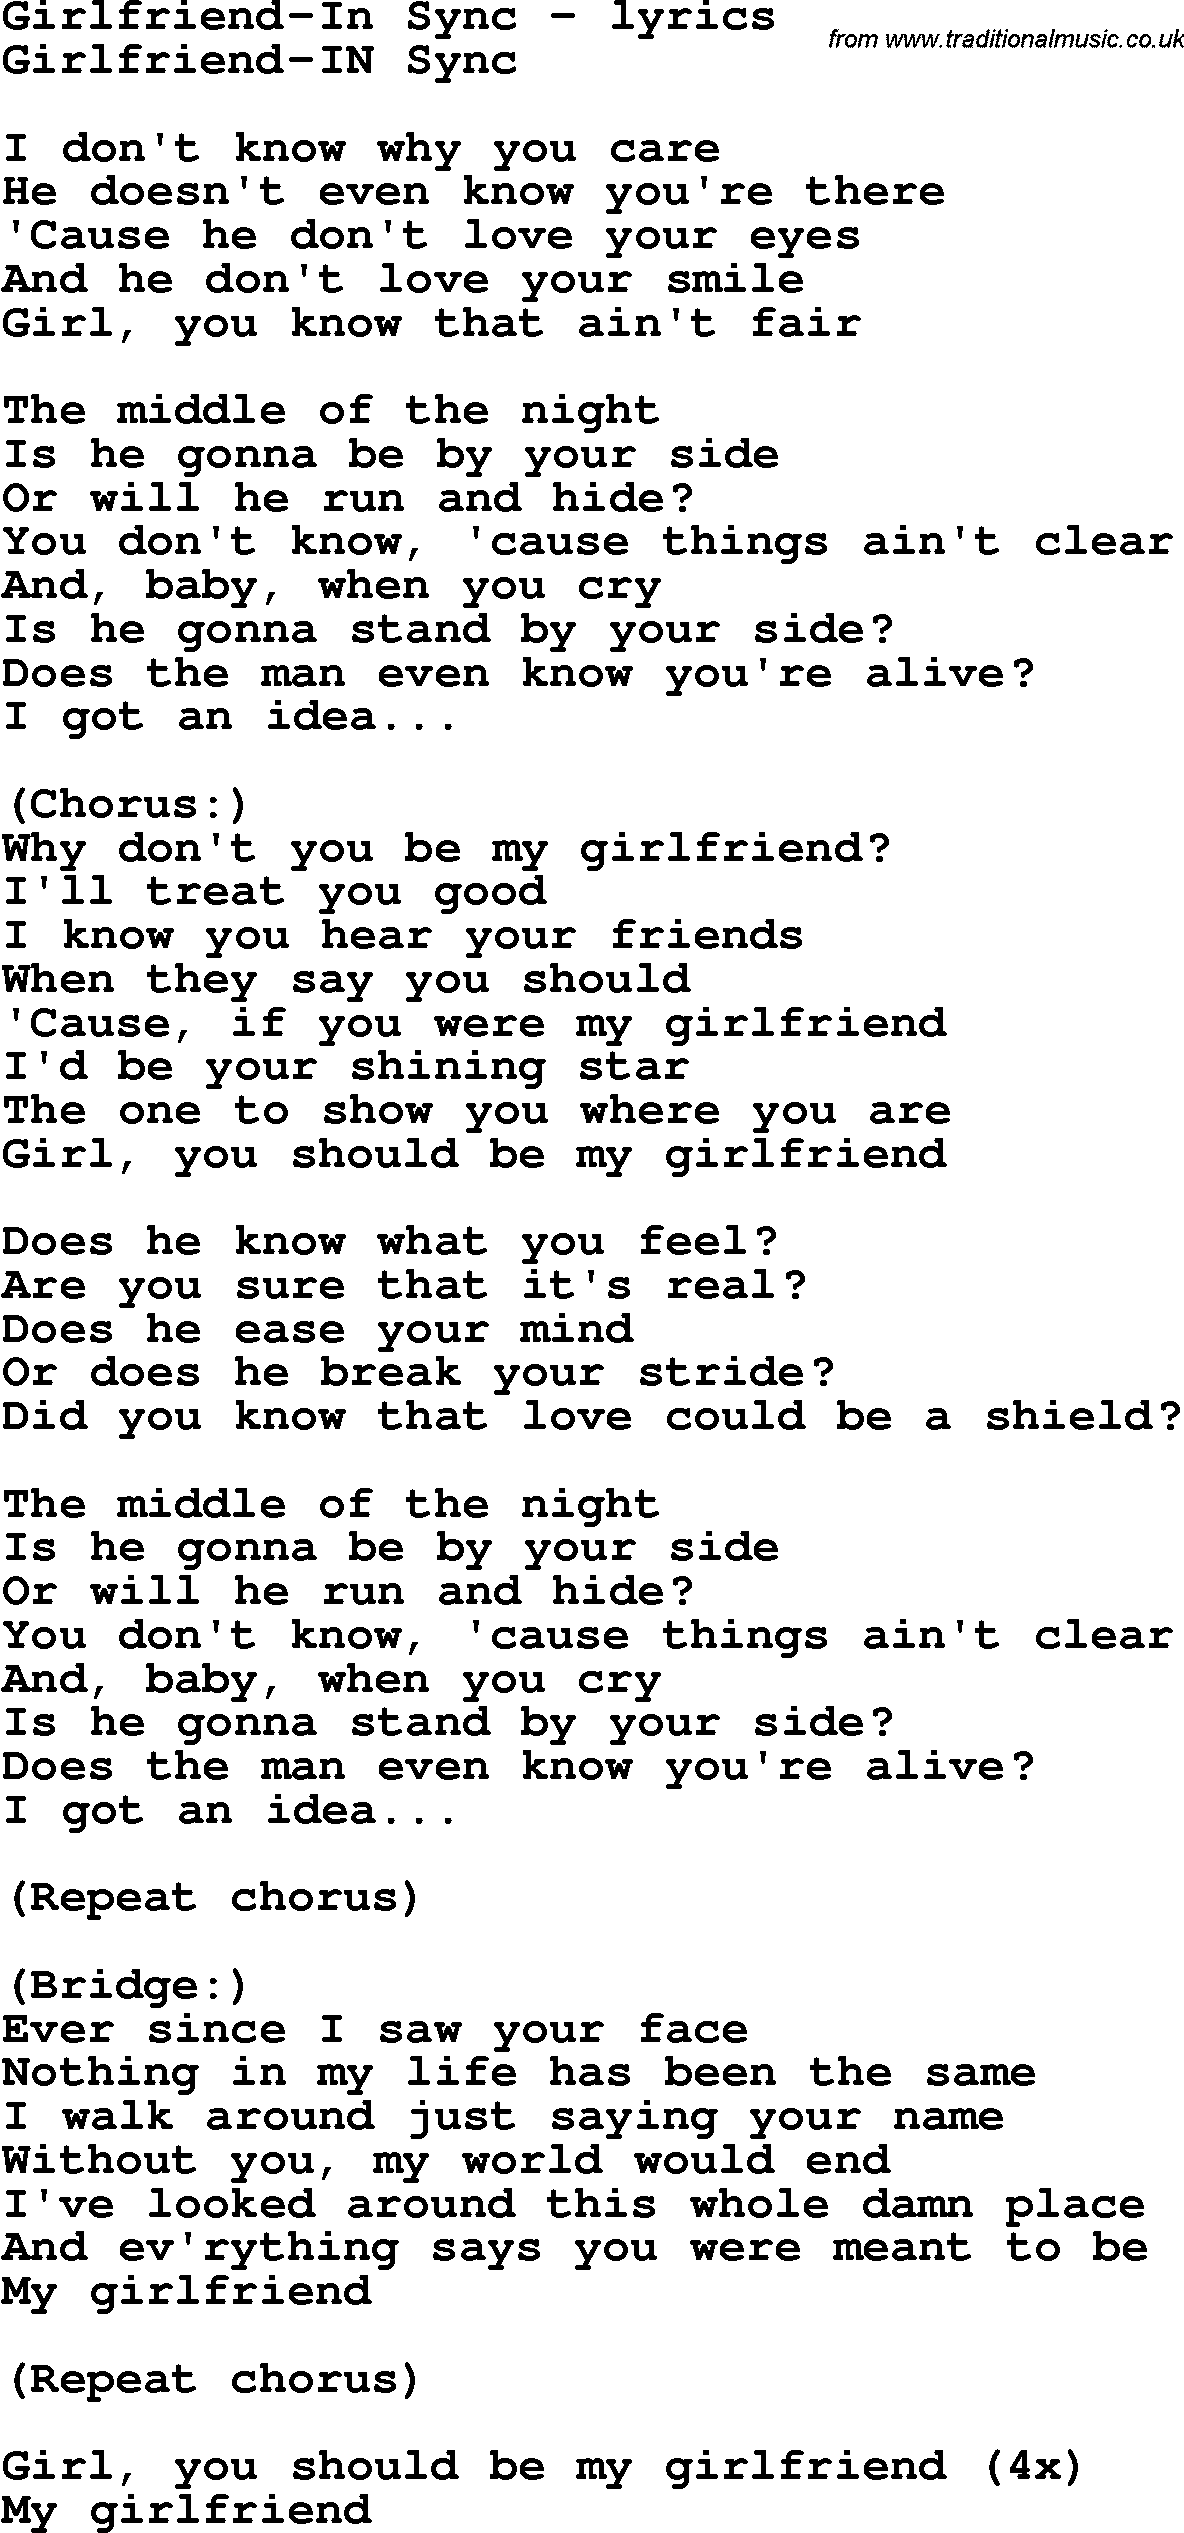 Love Song Lyrics for: Girlfriend-In Sync